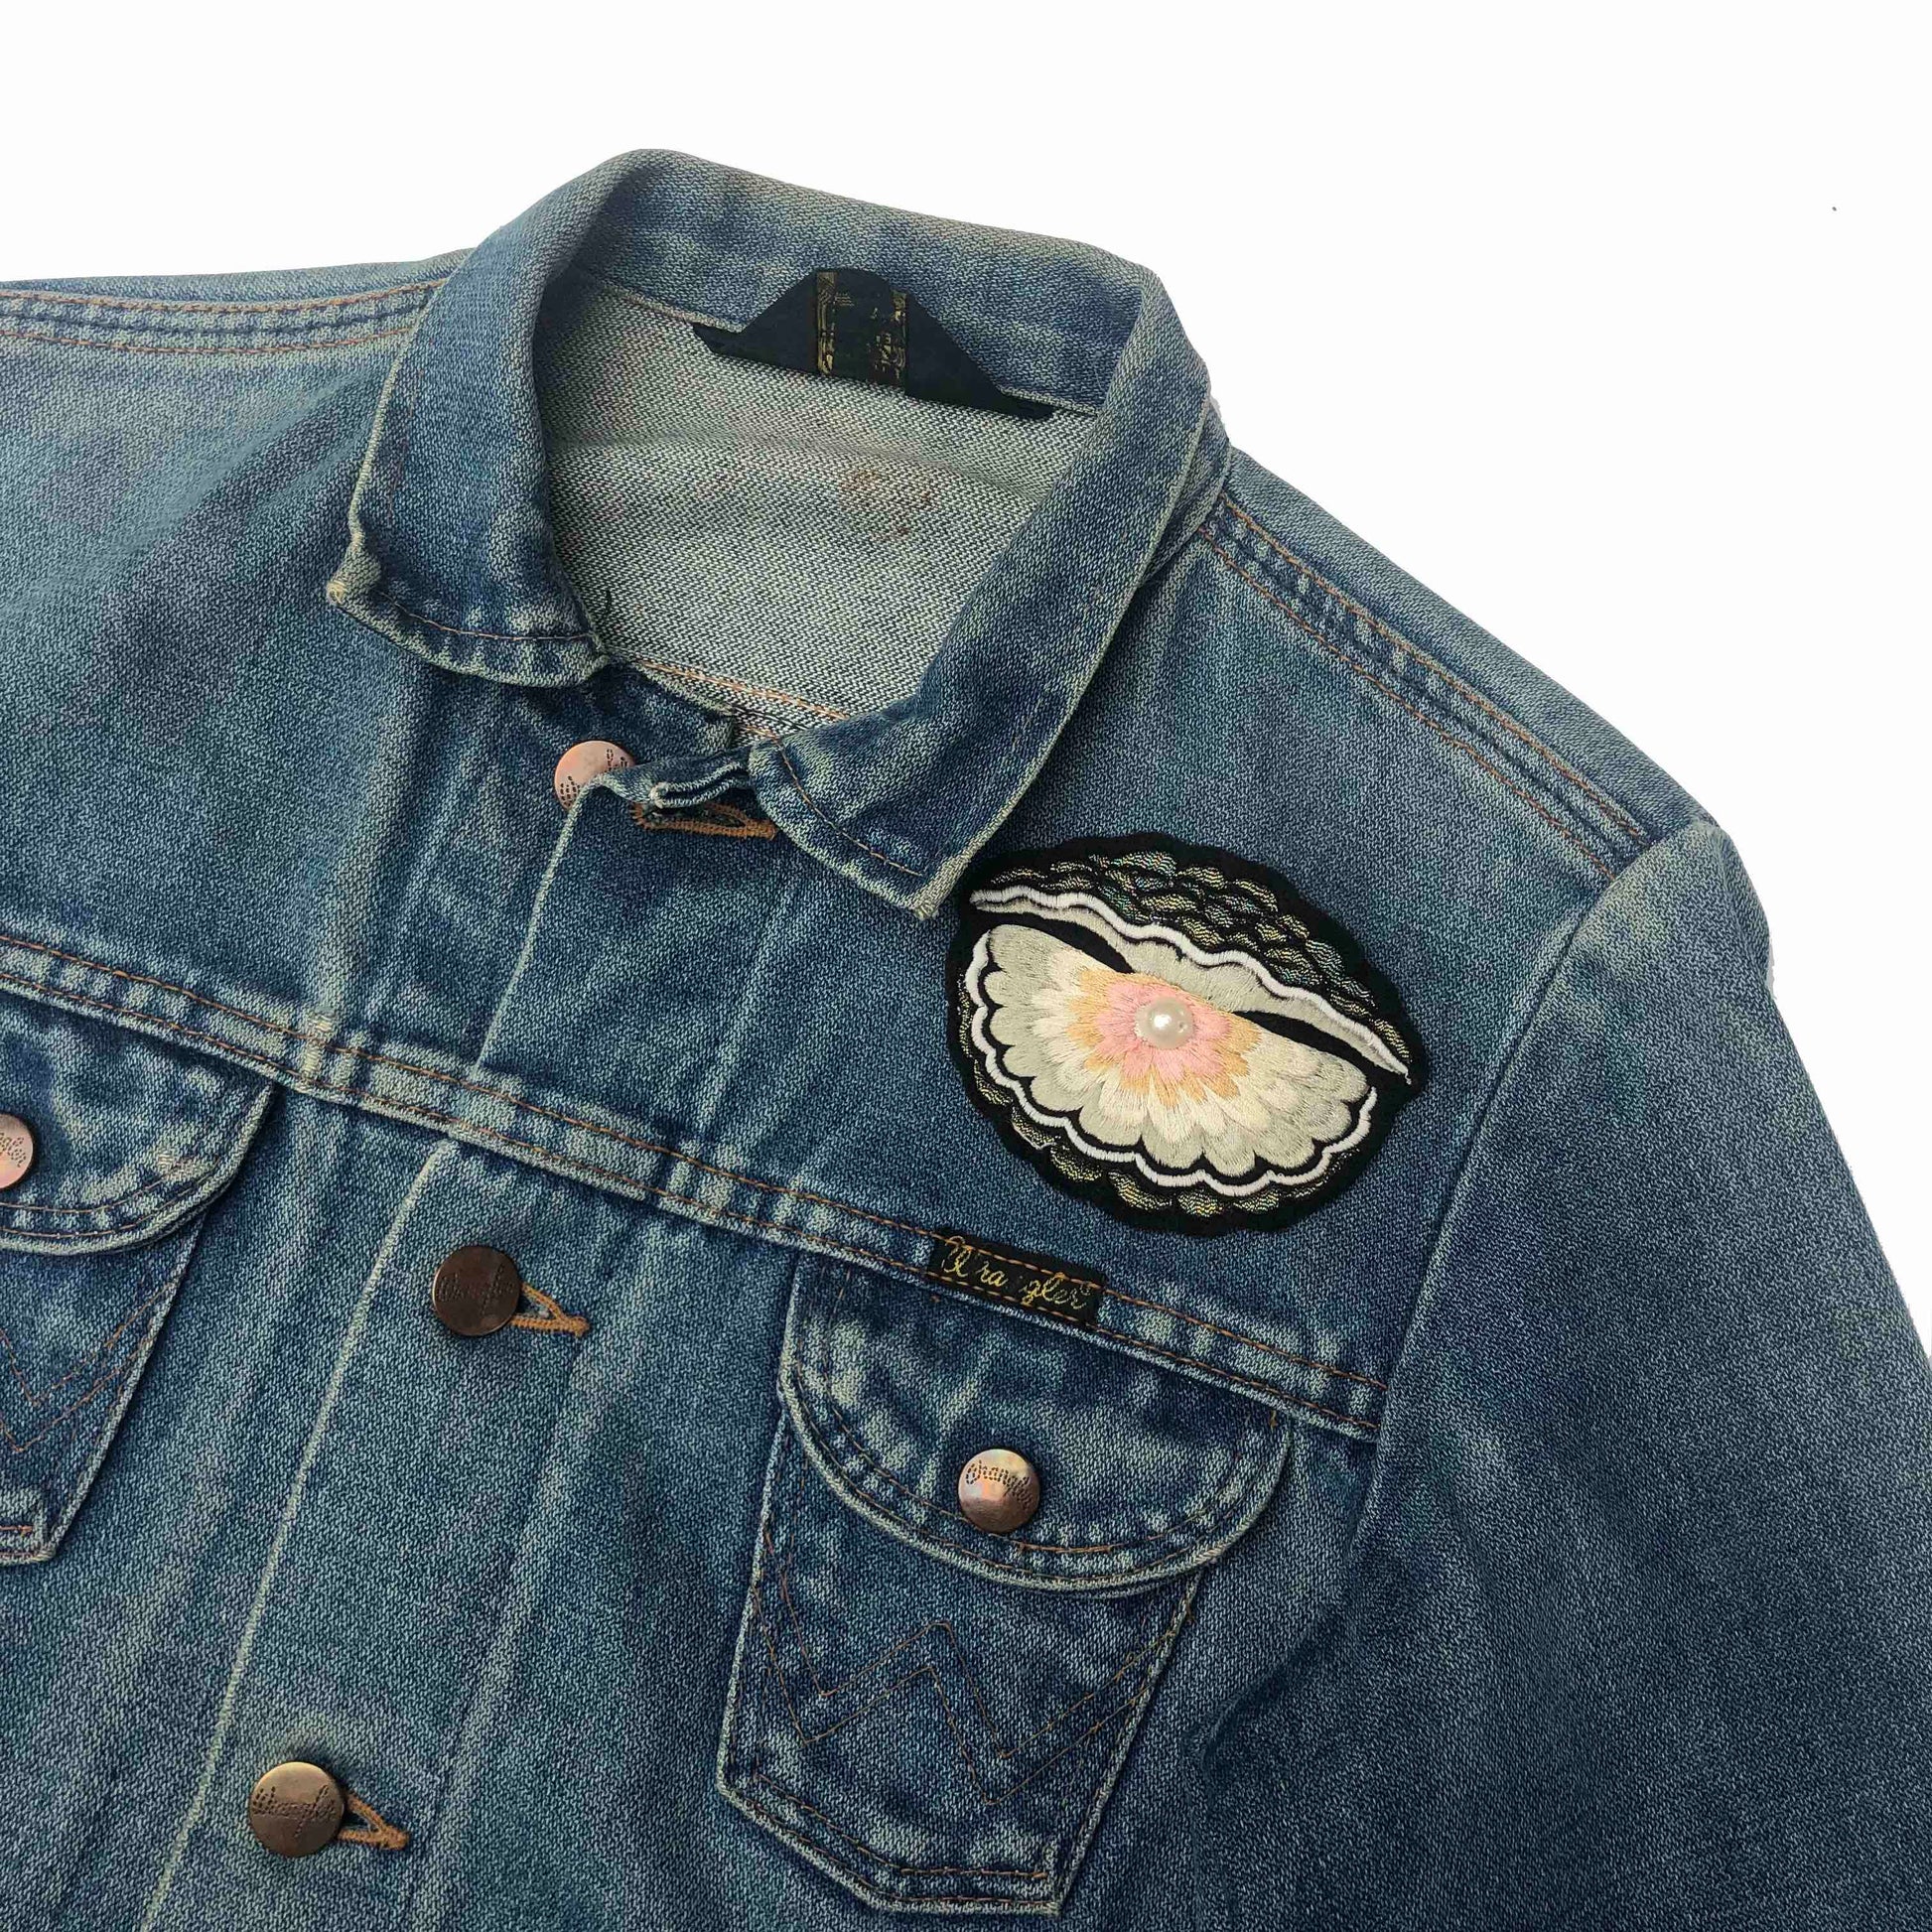 Oyster with pearl embroidered patch shown on front shoulder of a blue denim jacket